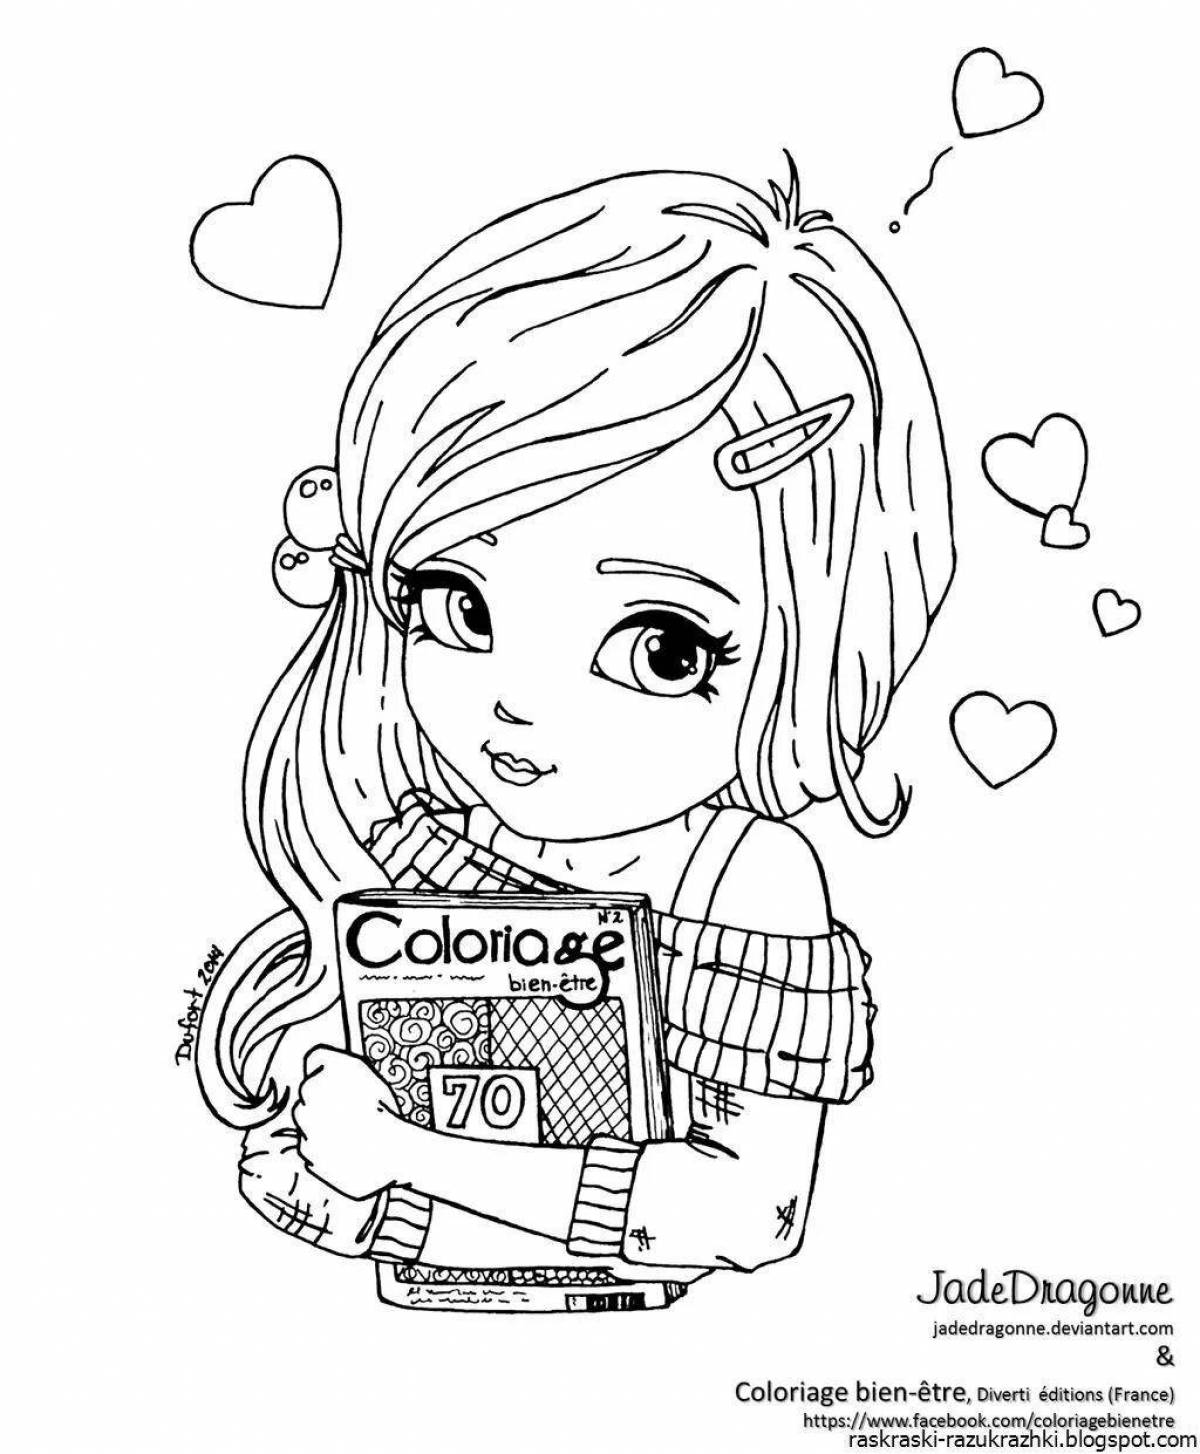 Charming coloring book for girls 11 years old